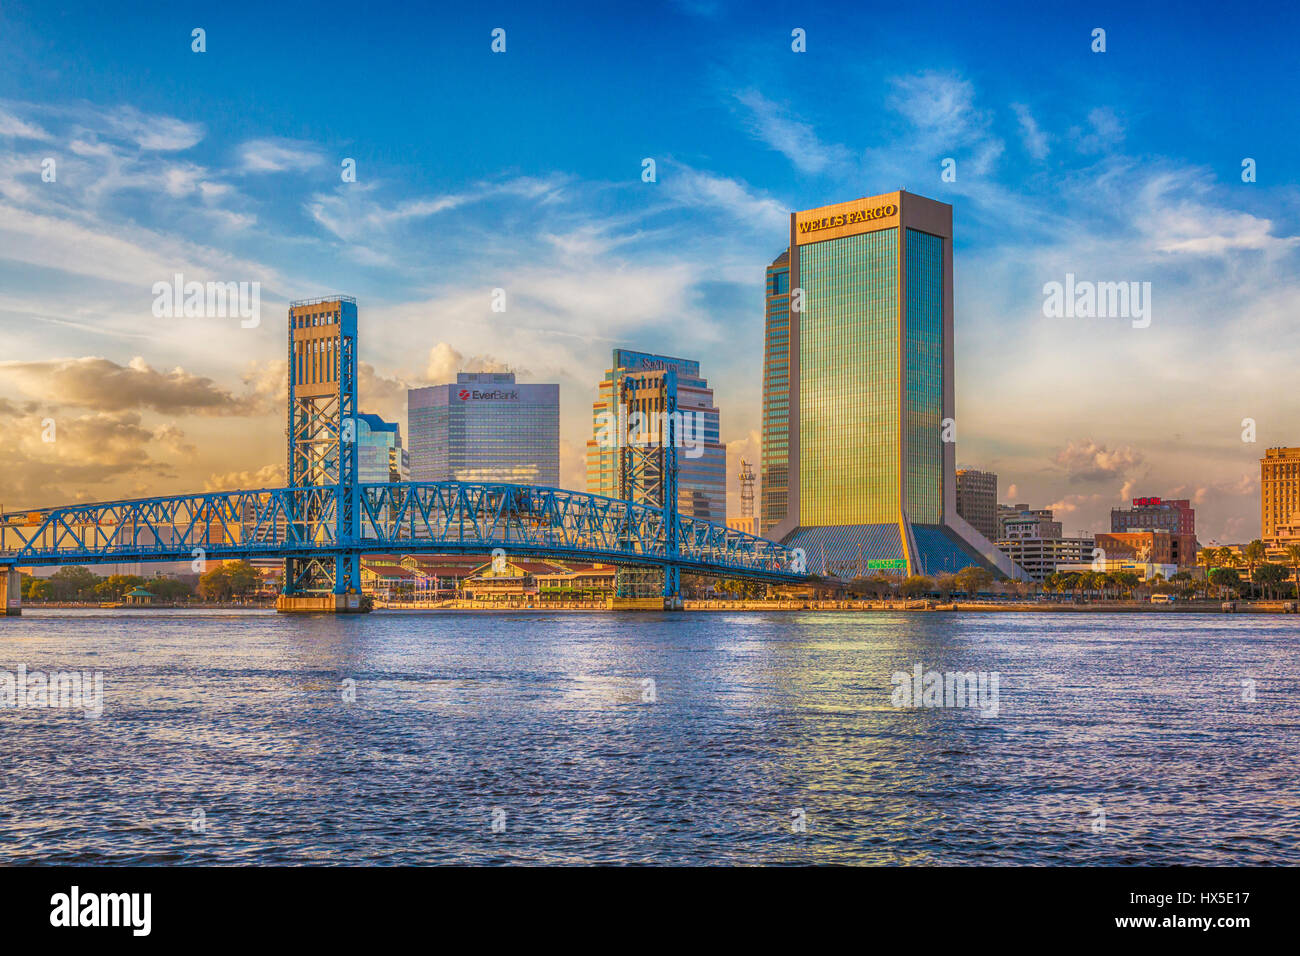 Sunset on downtown buildings and bridges on St Johns River in downtown Jacksonville, Florida. Stock Photo